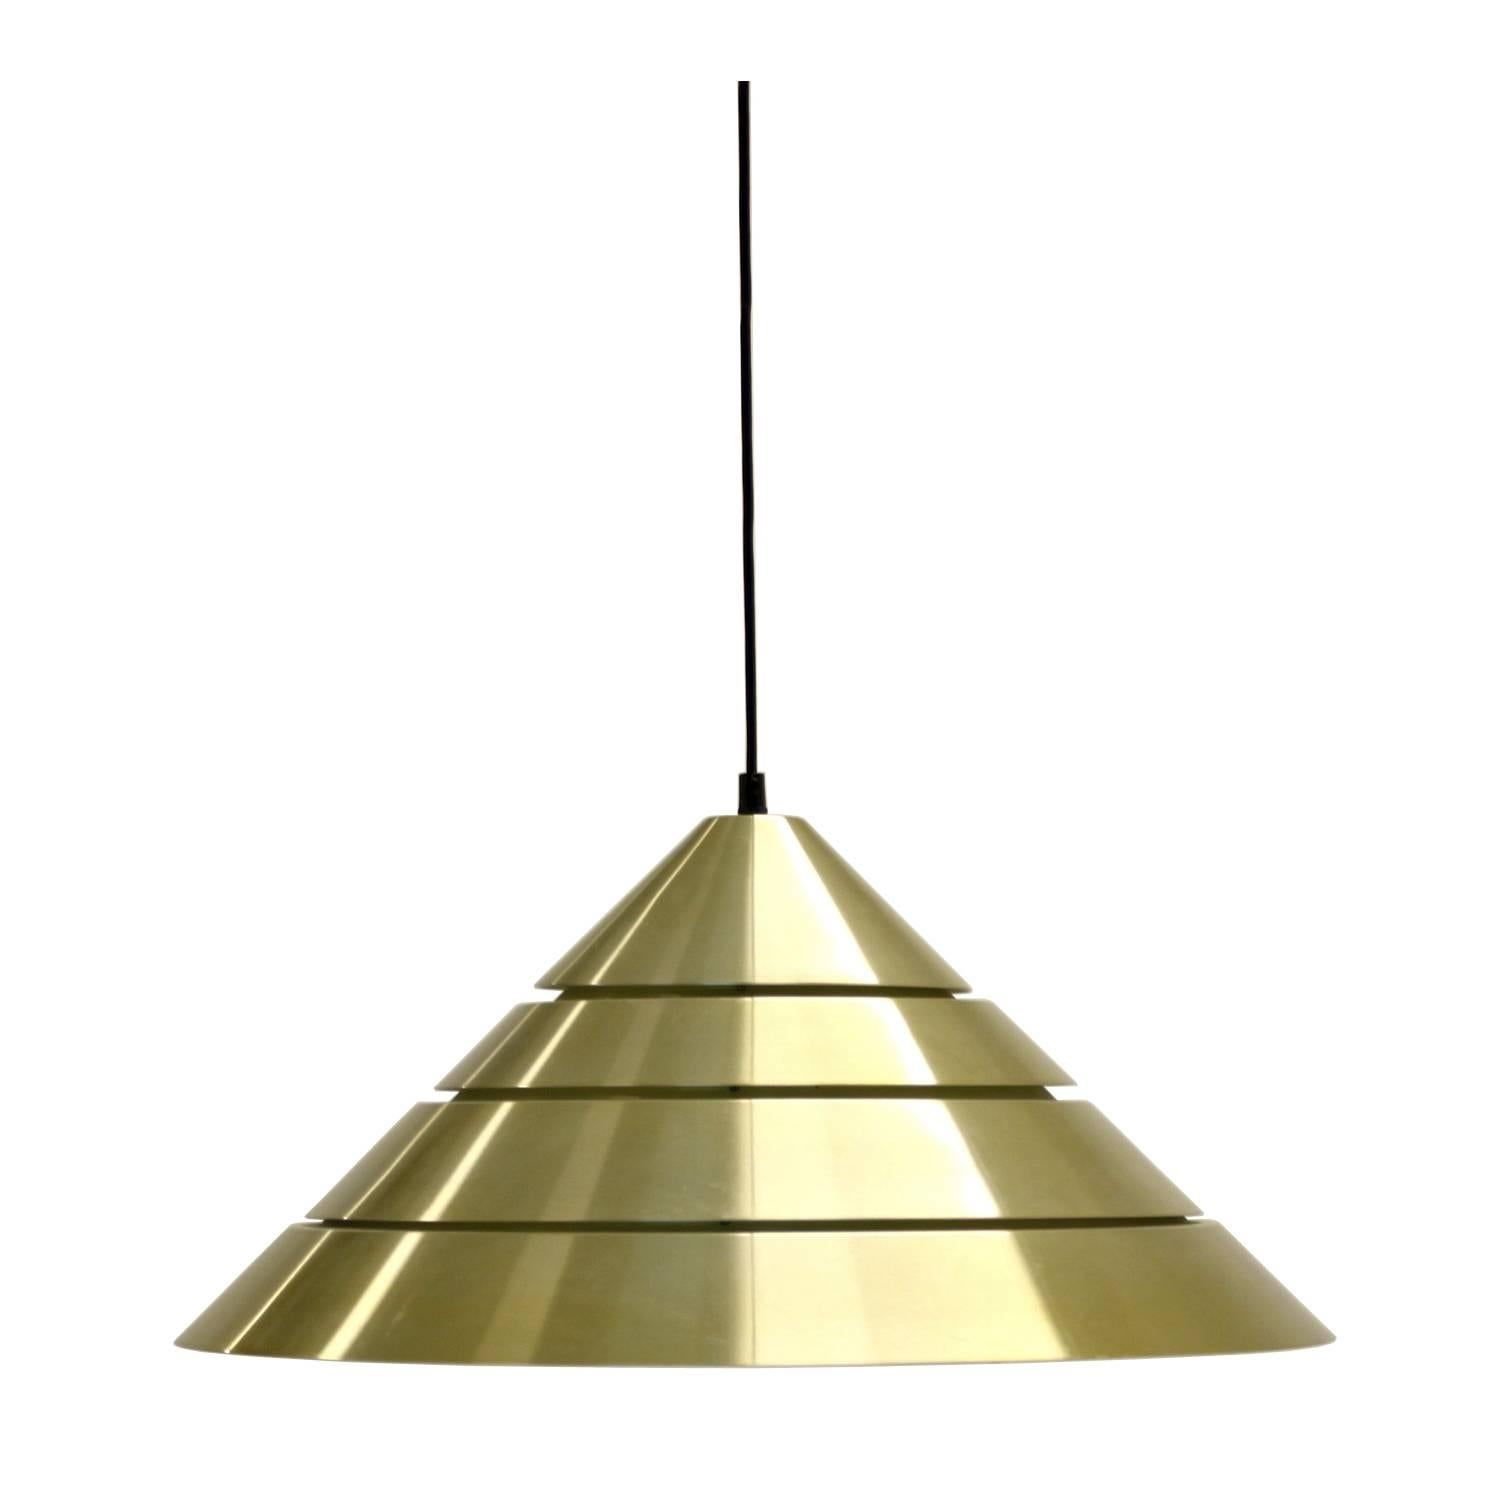 Cone Ceiling Light by Hans-Agne Jakobsson, 1970s